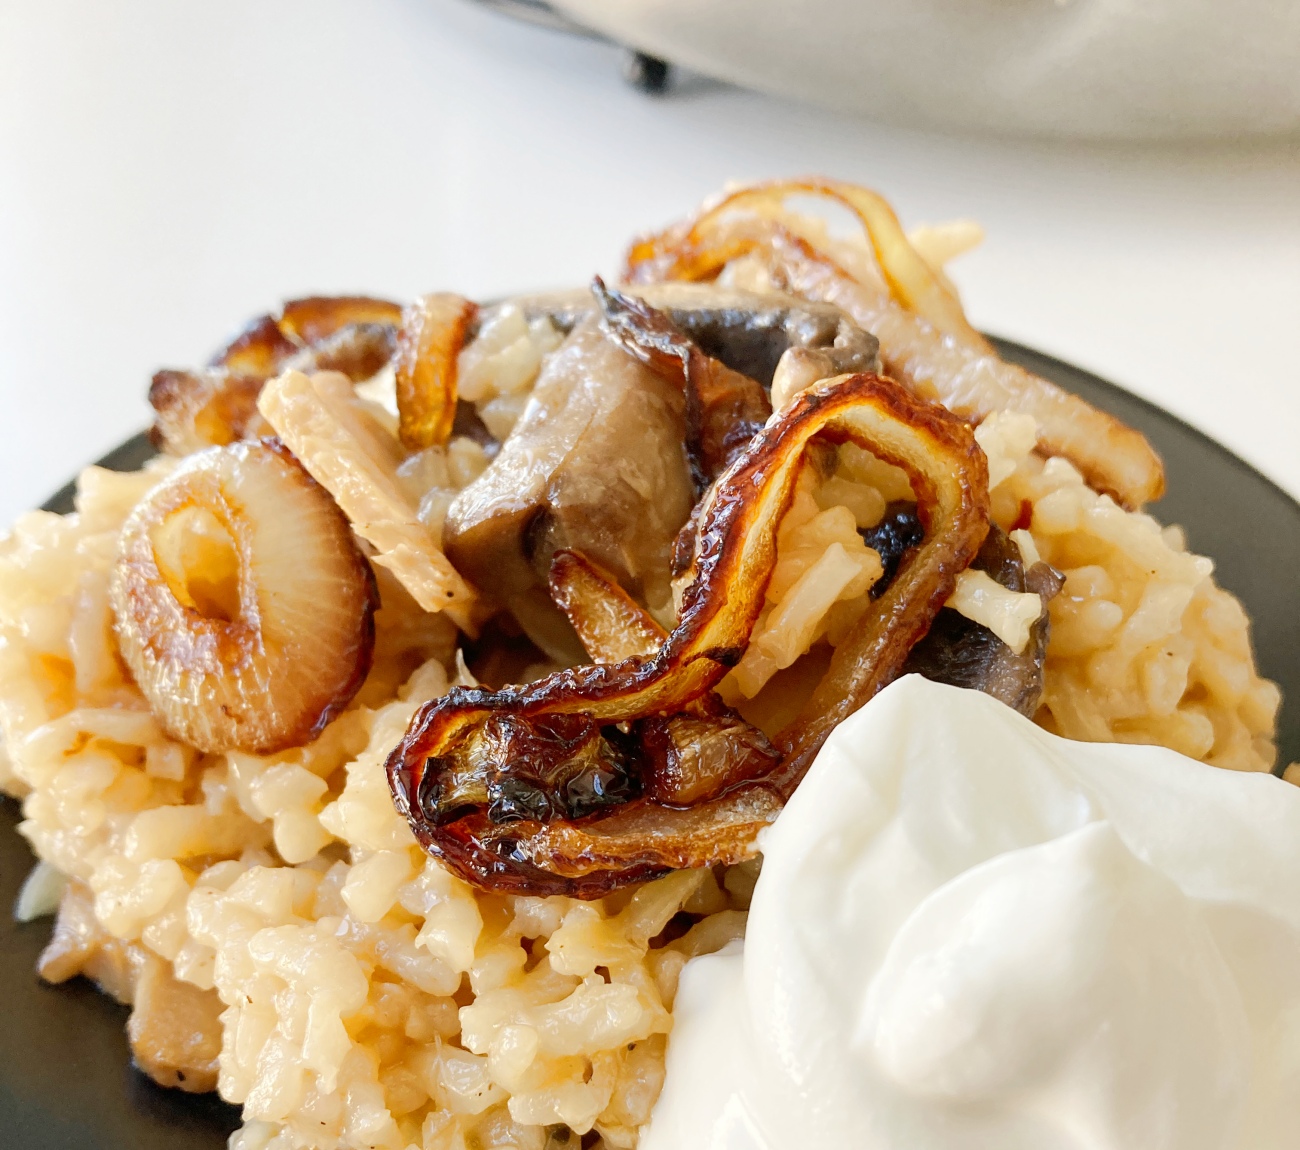 
Caramelized Onion Mushroom Oven Risotto 